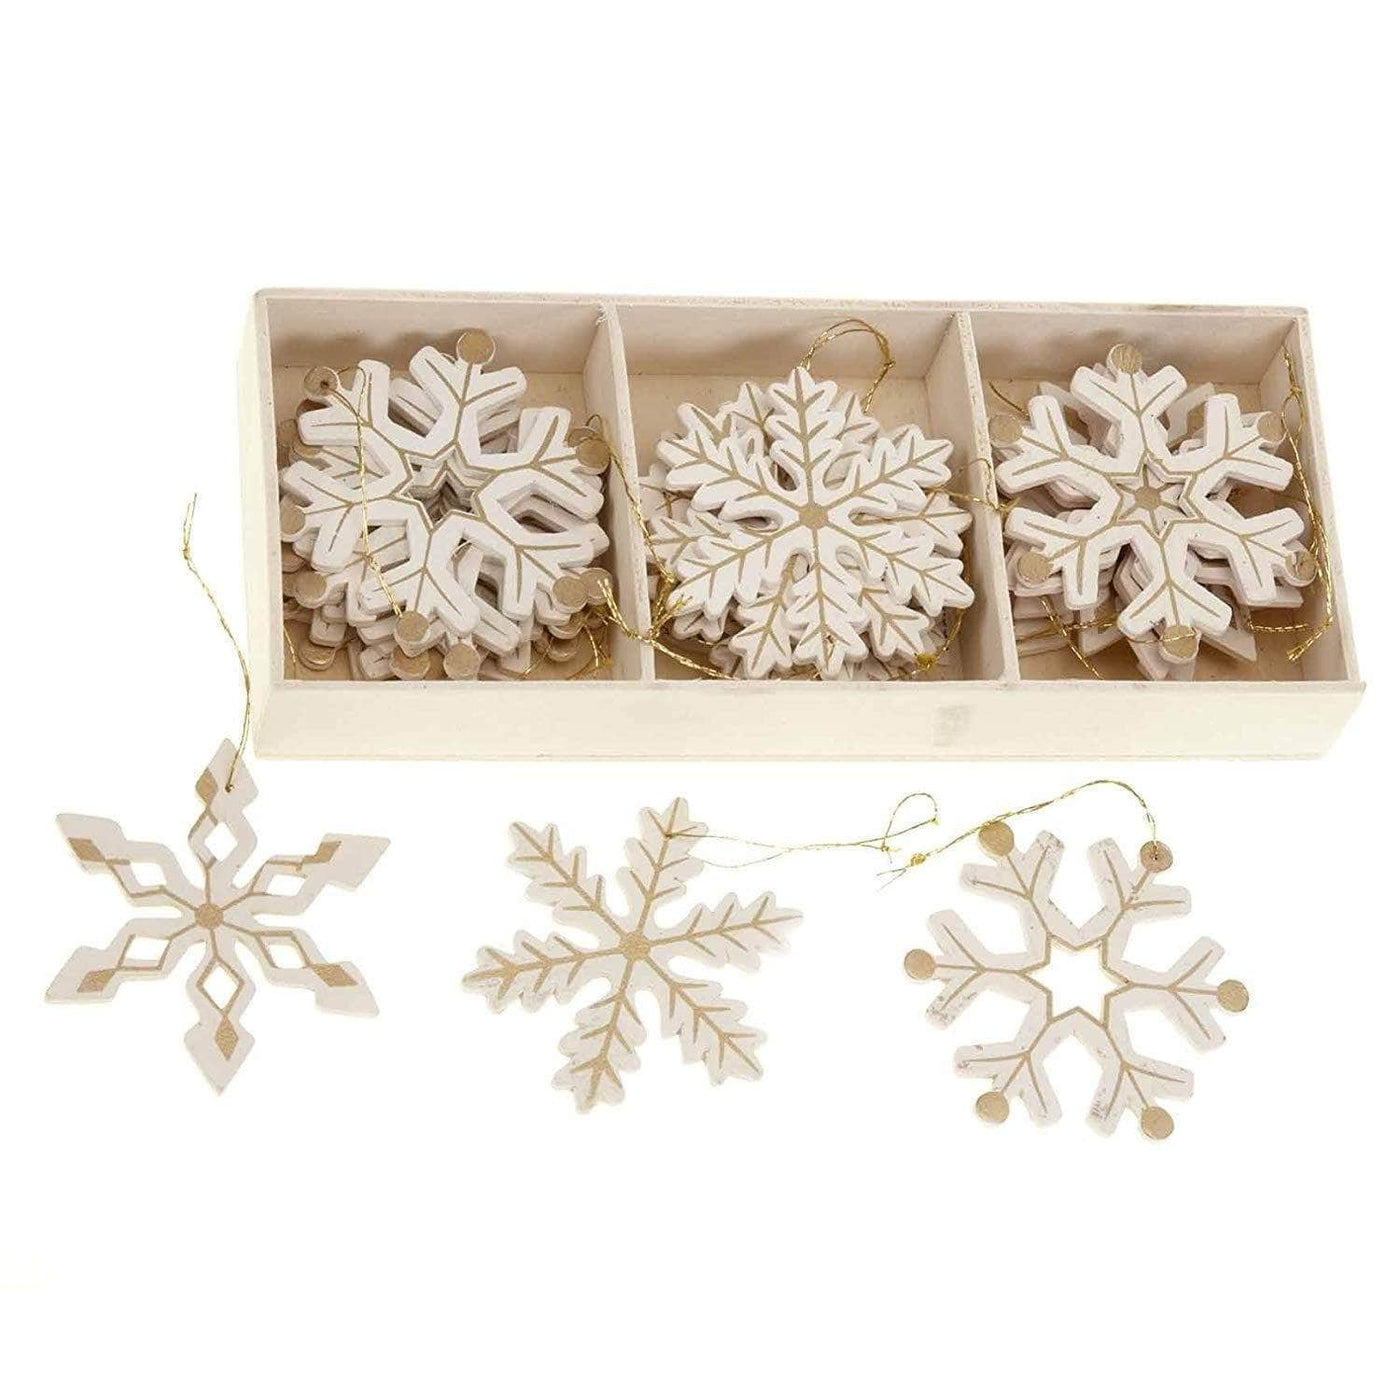 Heaven Sends Christmas Christmas Decorations Natural Wooden Snowflakes Hanging Decorations